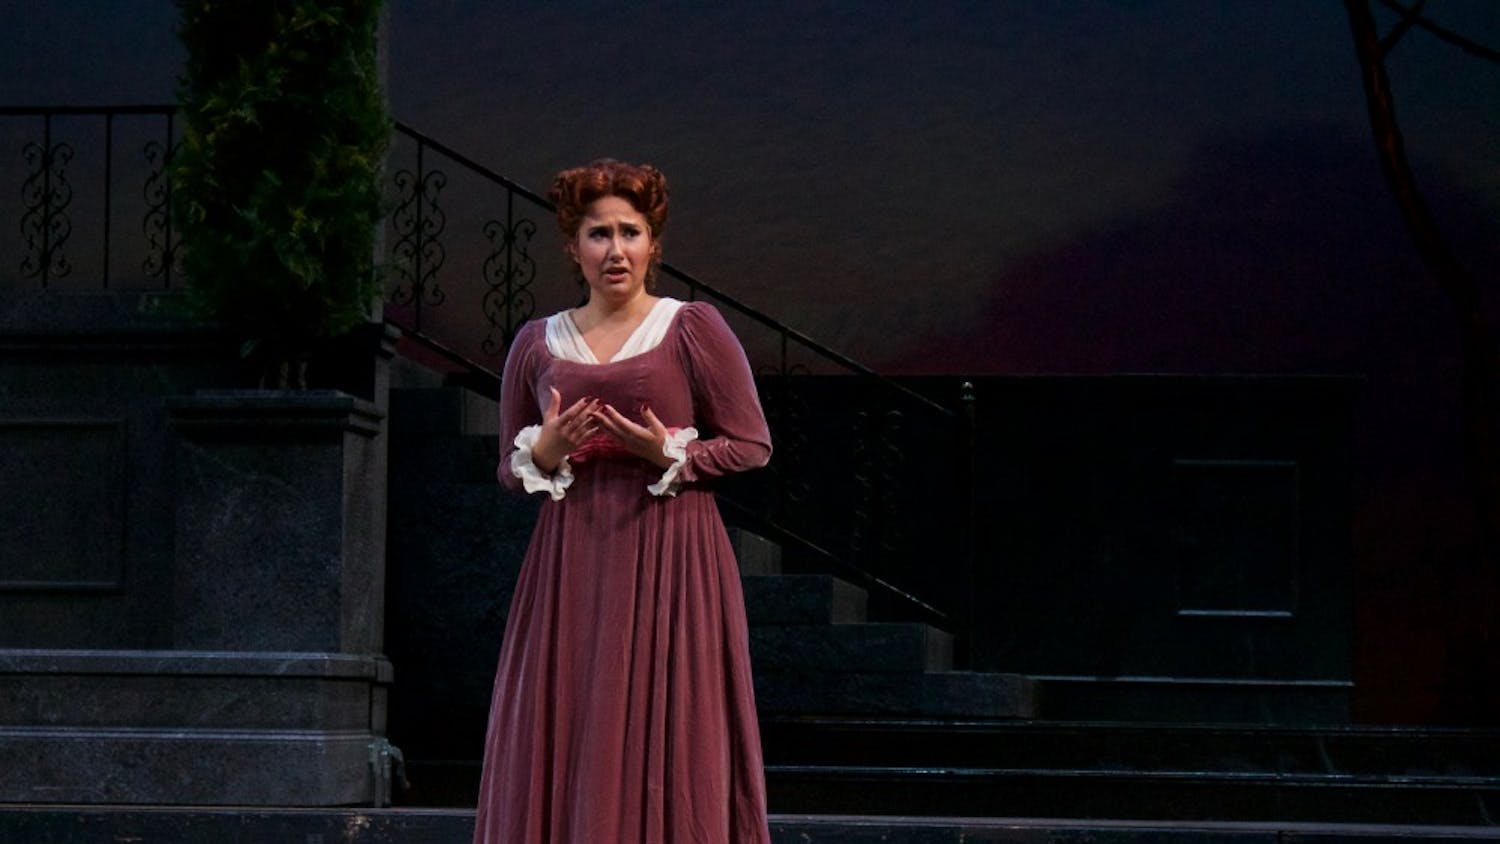 GALLERY: "Don Giovanni" will debut September 15